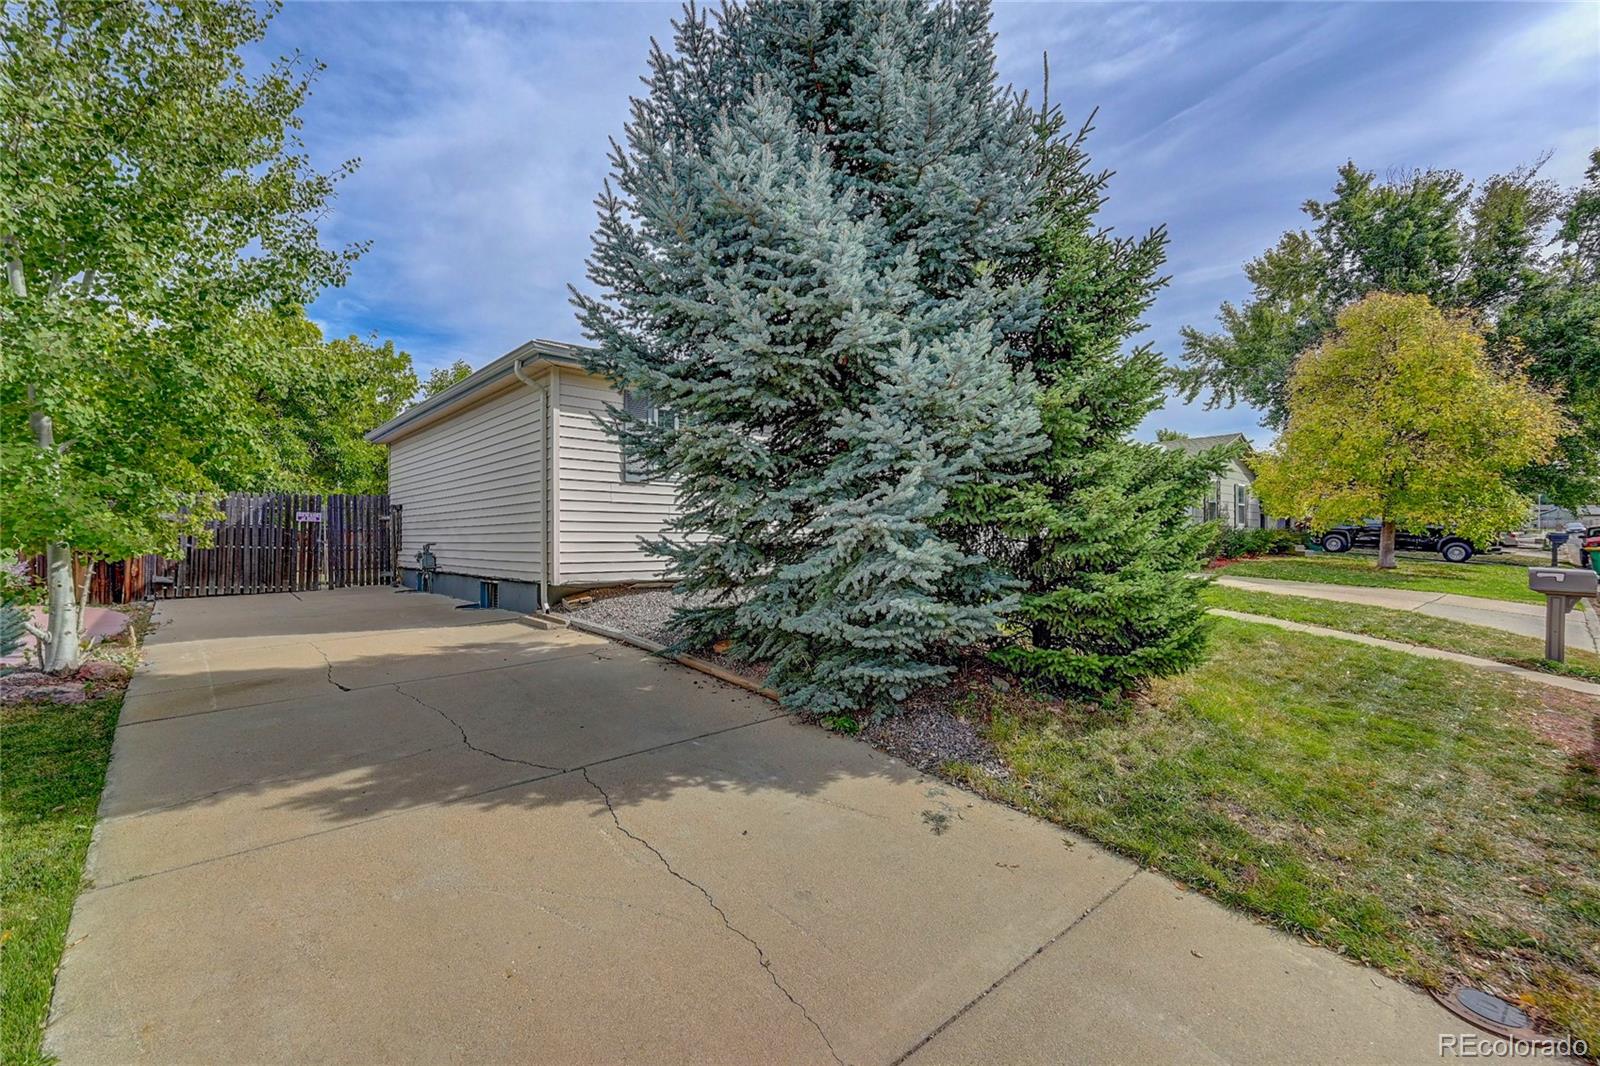 Report Image for 3060 S Hoyt Way,Lakewood, Colorado